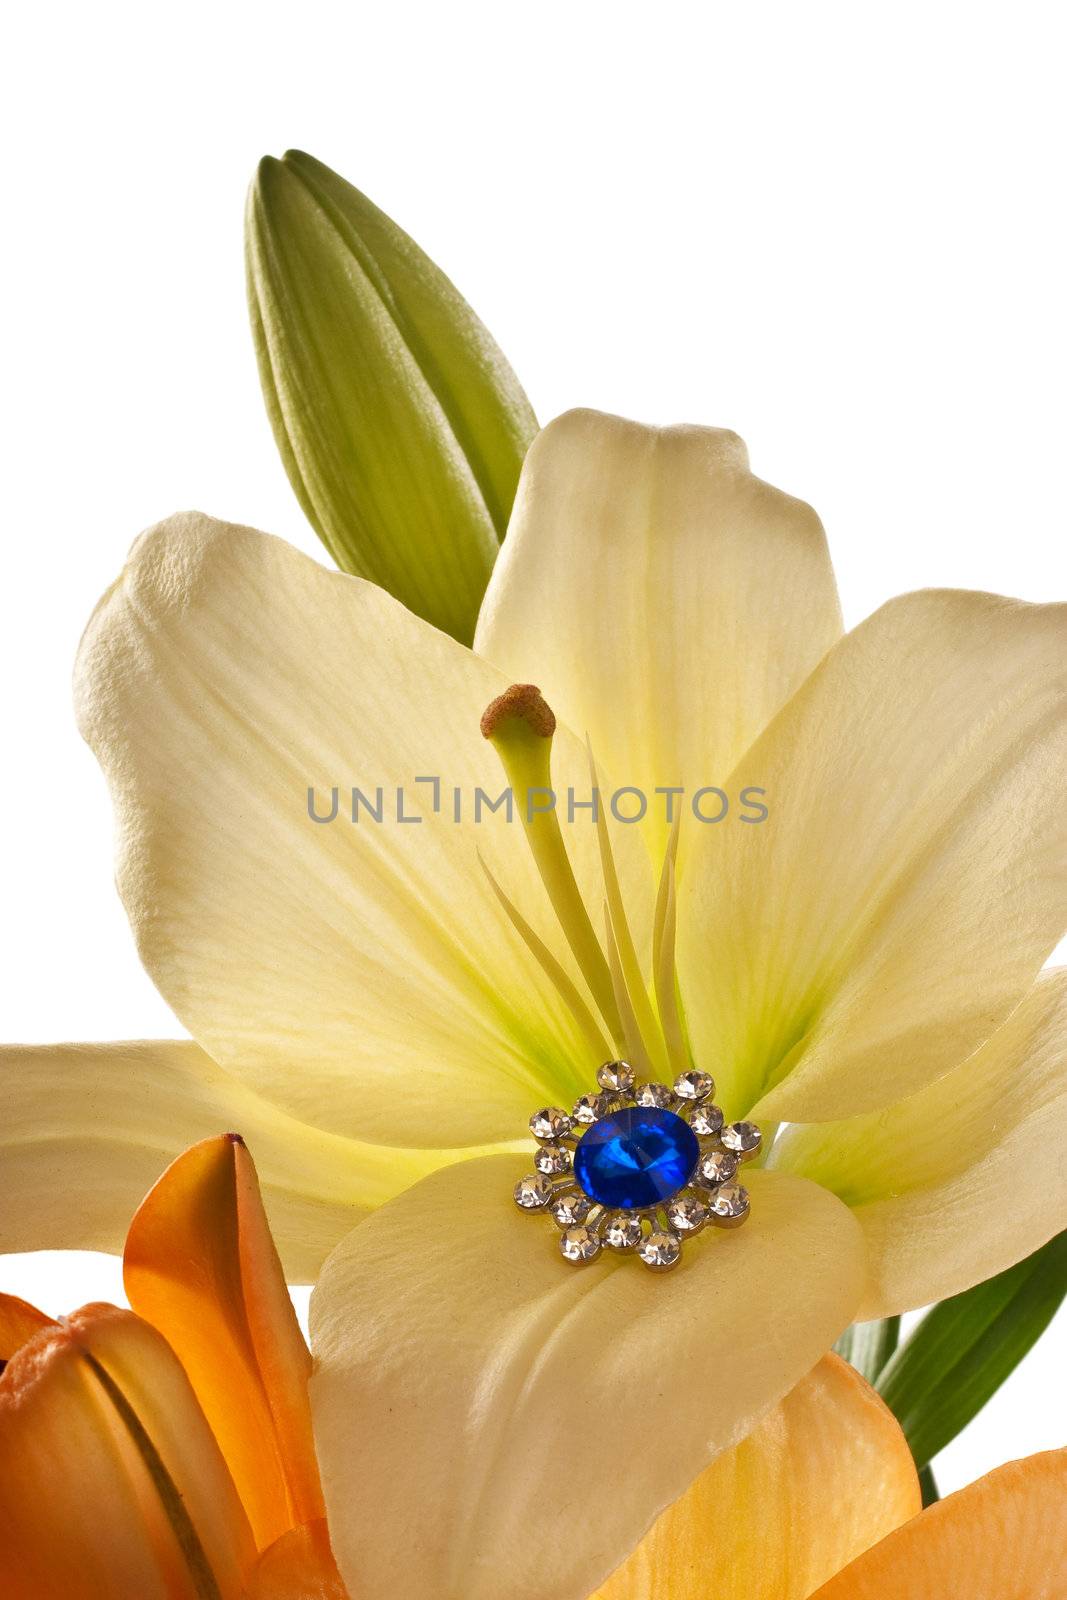 Lilies and a brooch with blue gem by igor_stramyk